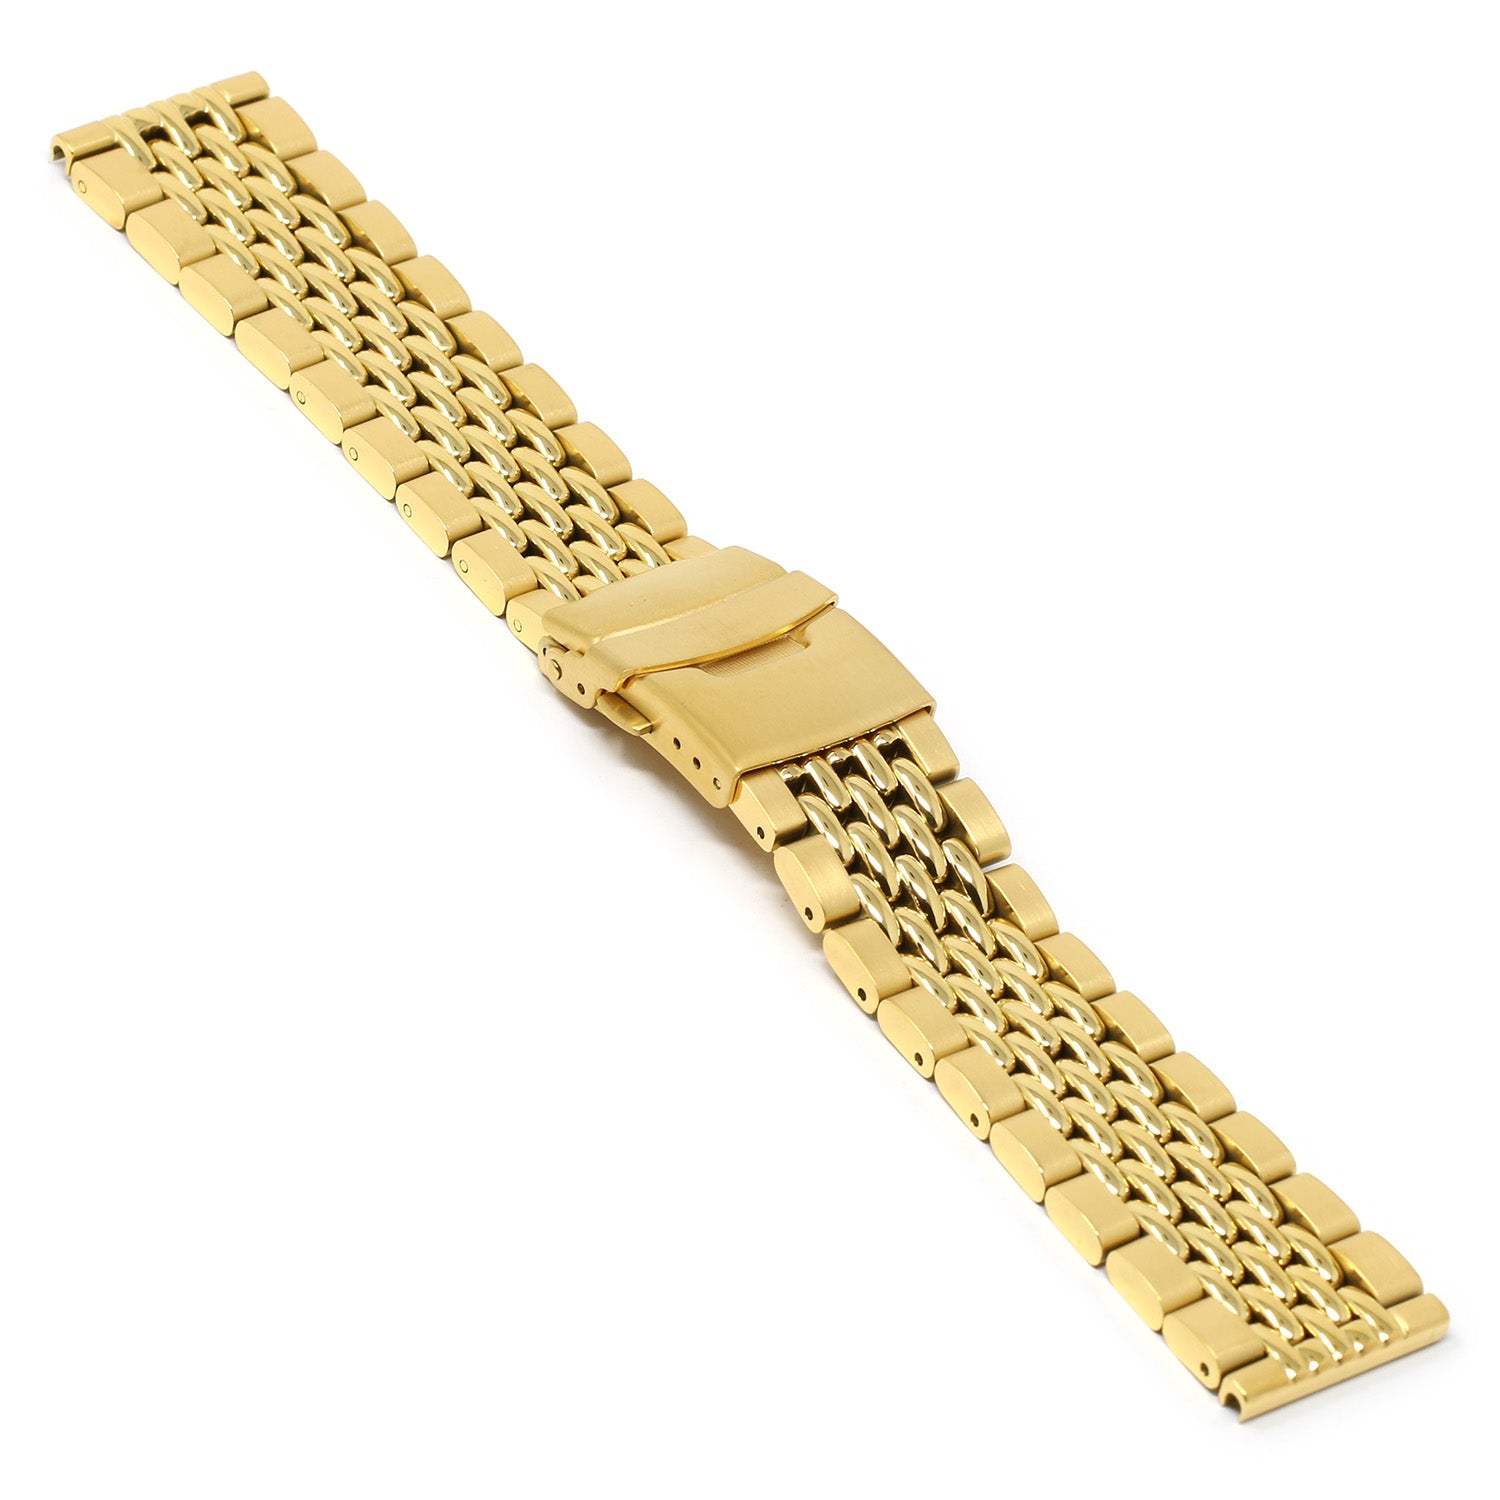 Omega 1037 Gold Plated Beads of Rice Bracelet 17mm – Belmont Watches